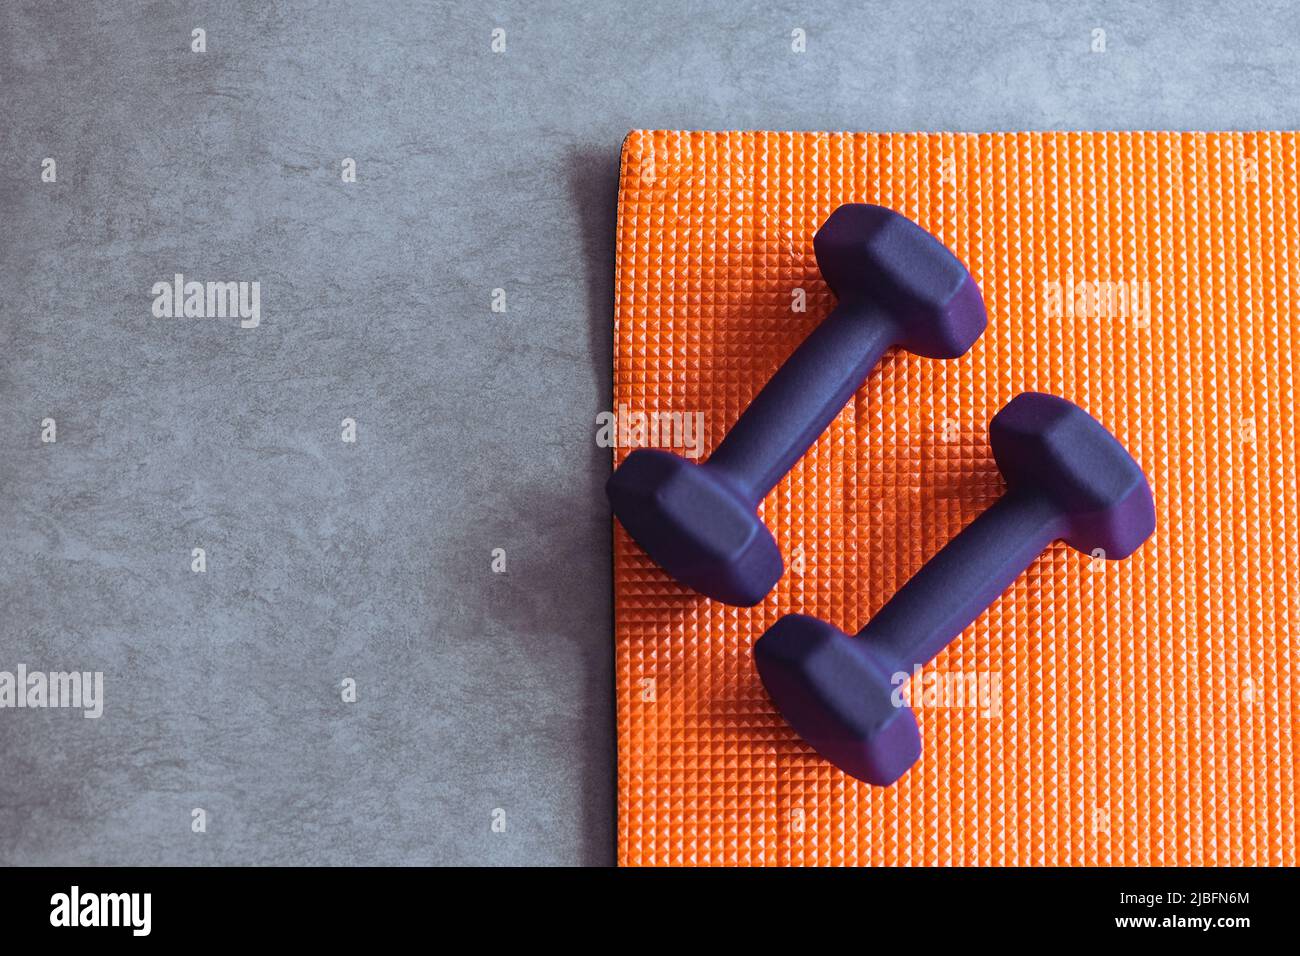 Top view of violet dumbbells and orange mat placed on gray floor during fitness workout Stock Photo